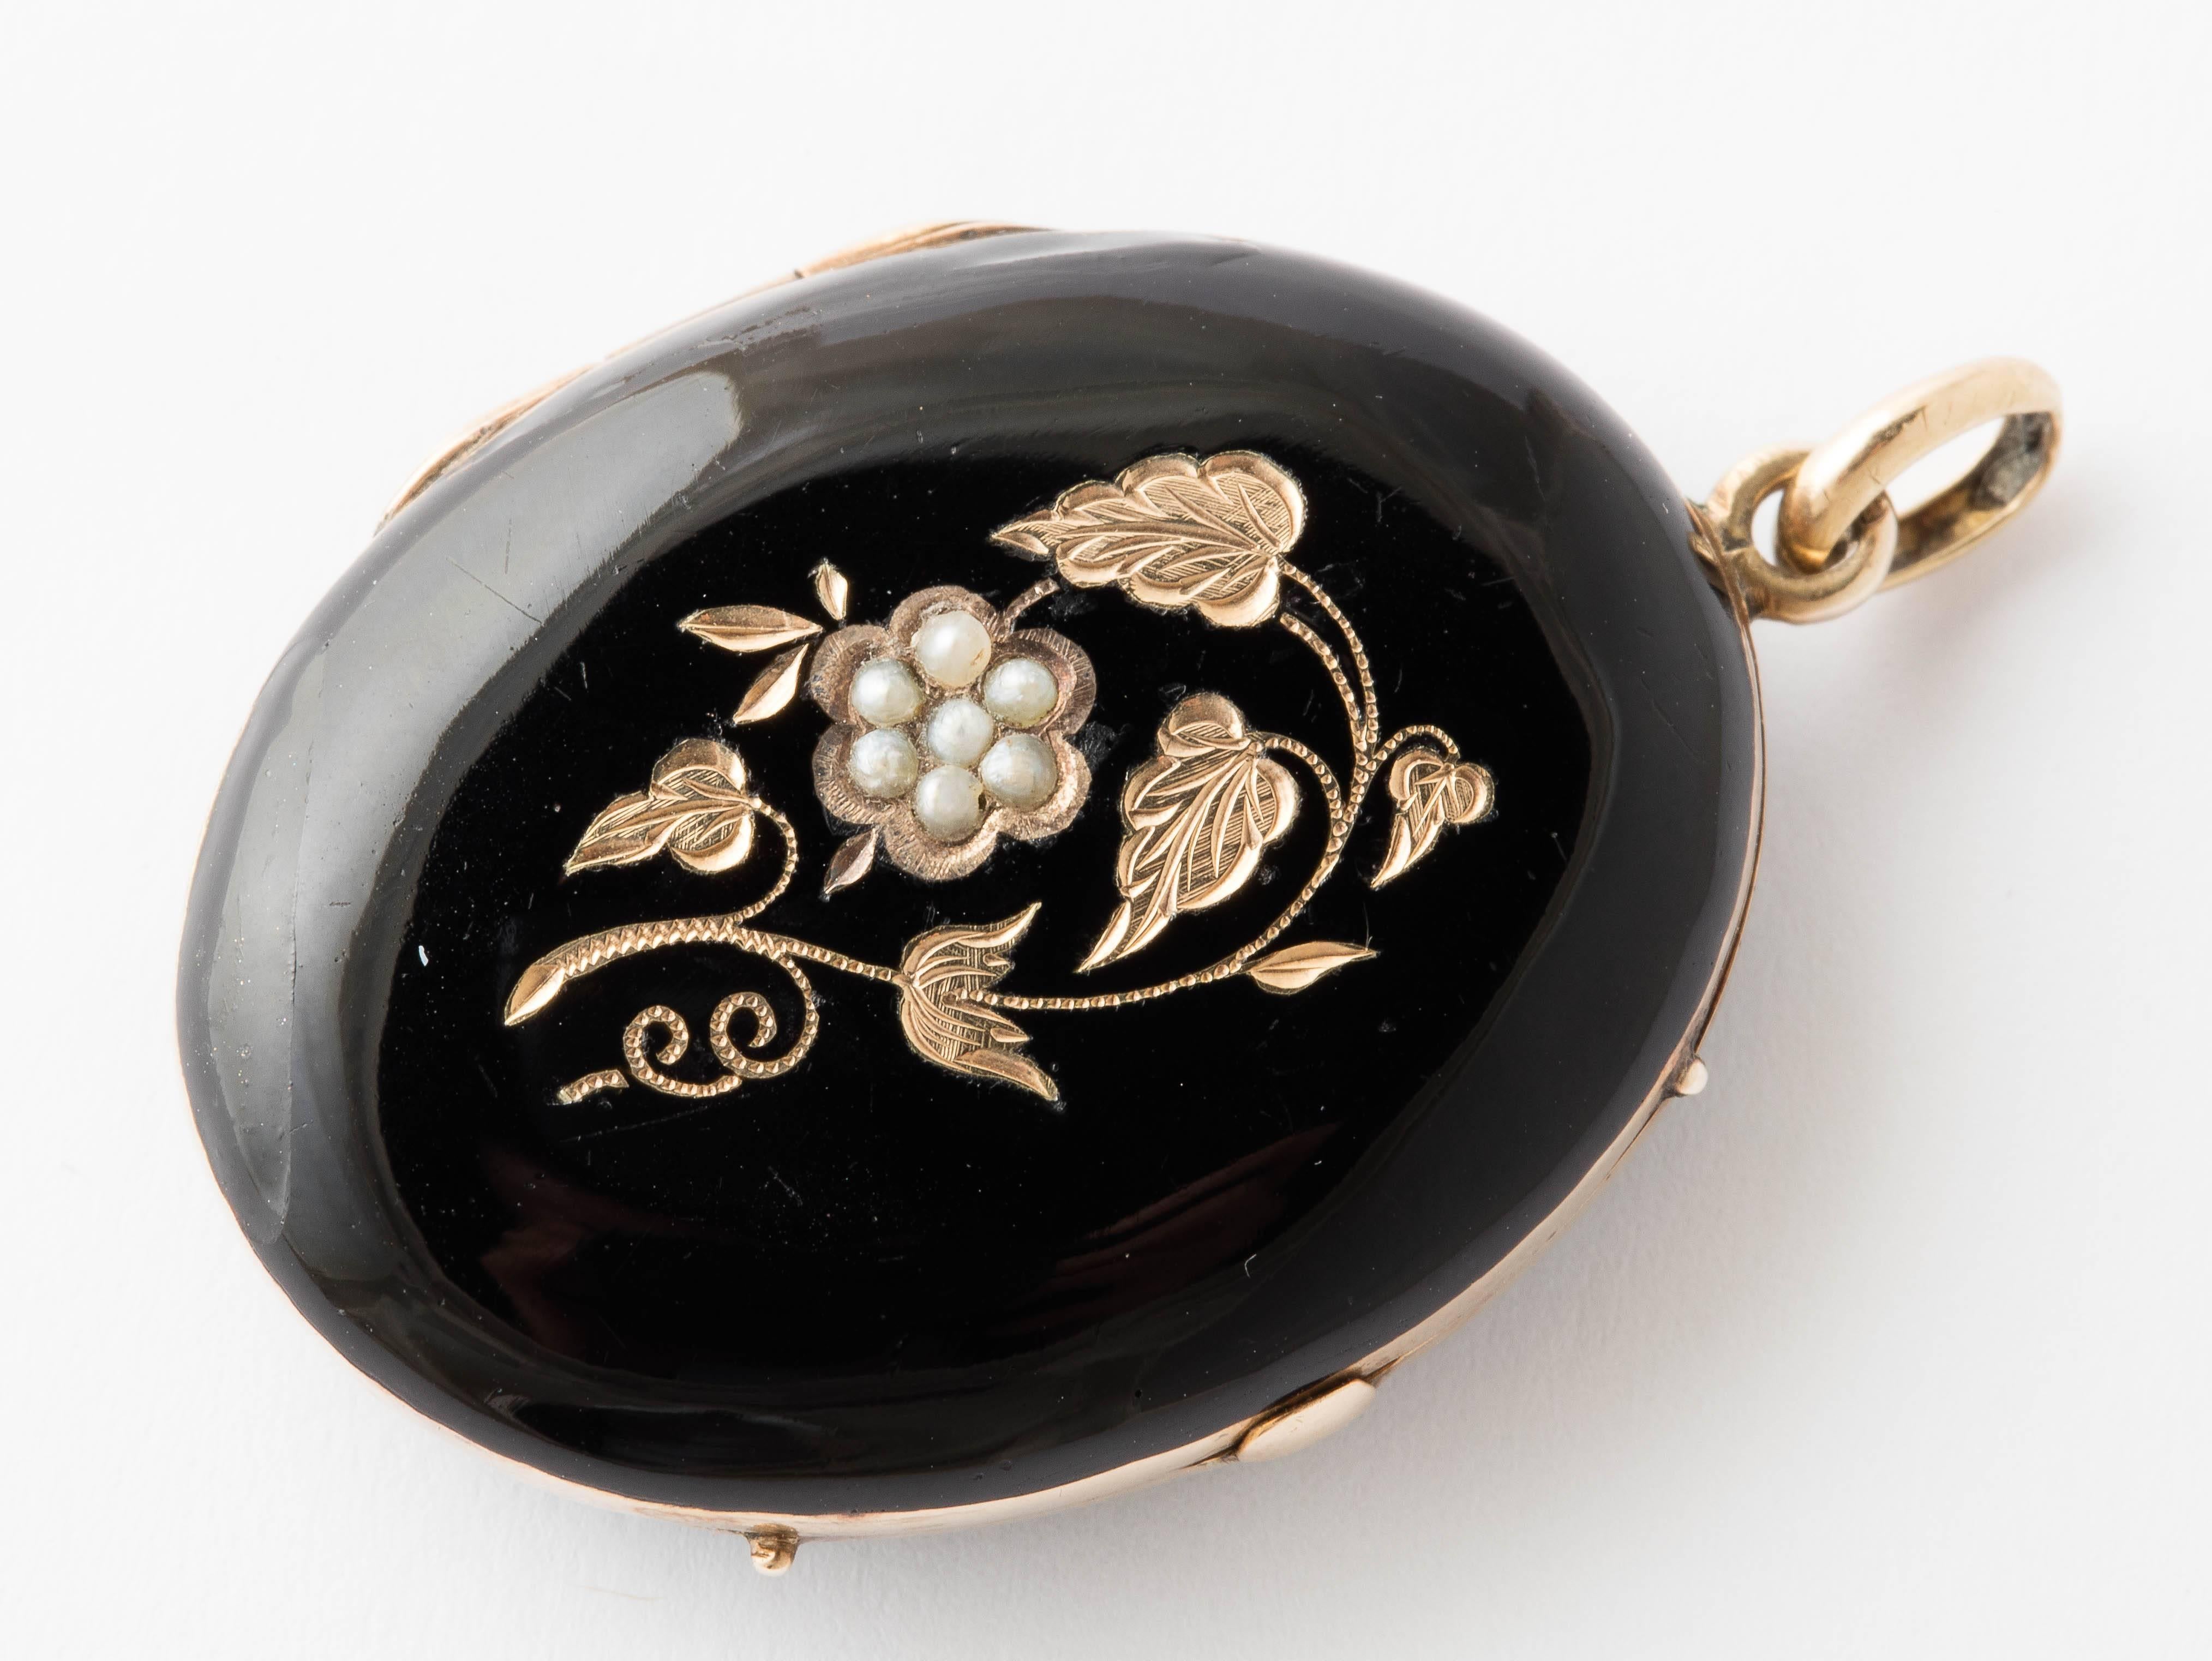 14K and black enamel Victorian oval locket. Front has engraved leaf and grape design in gold. Grape cluster is made of seven seed pearls. Back is entirely black enamel.